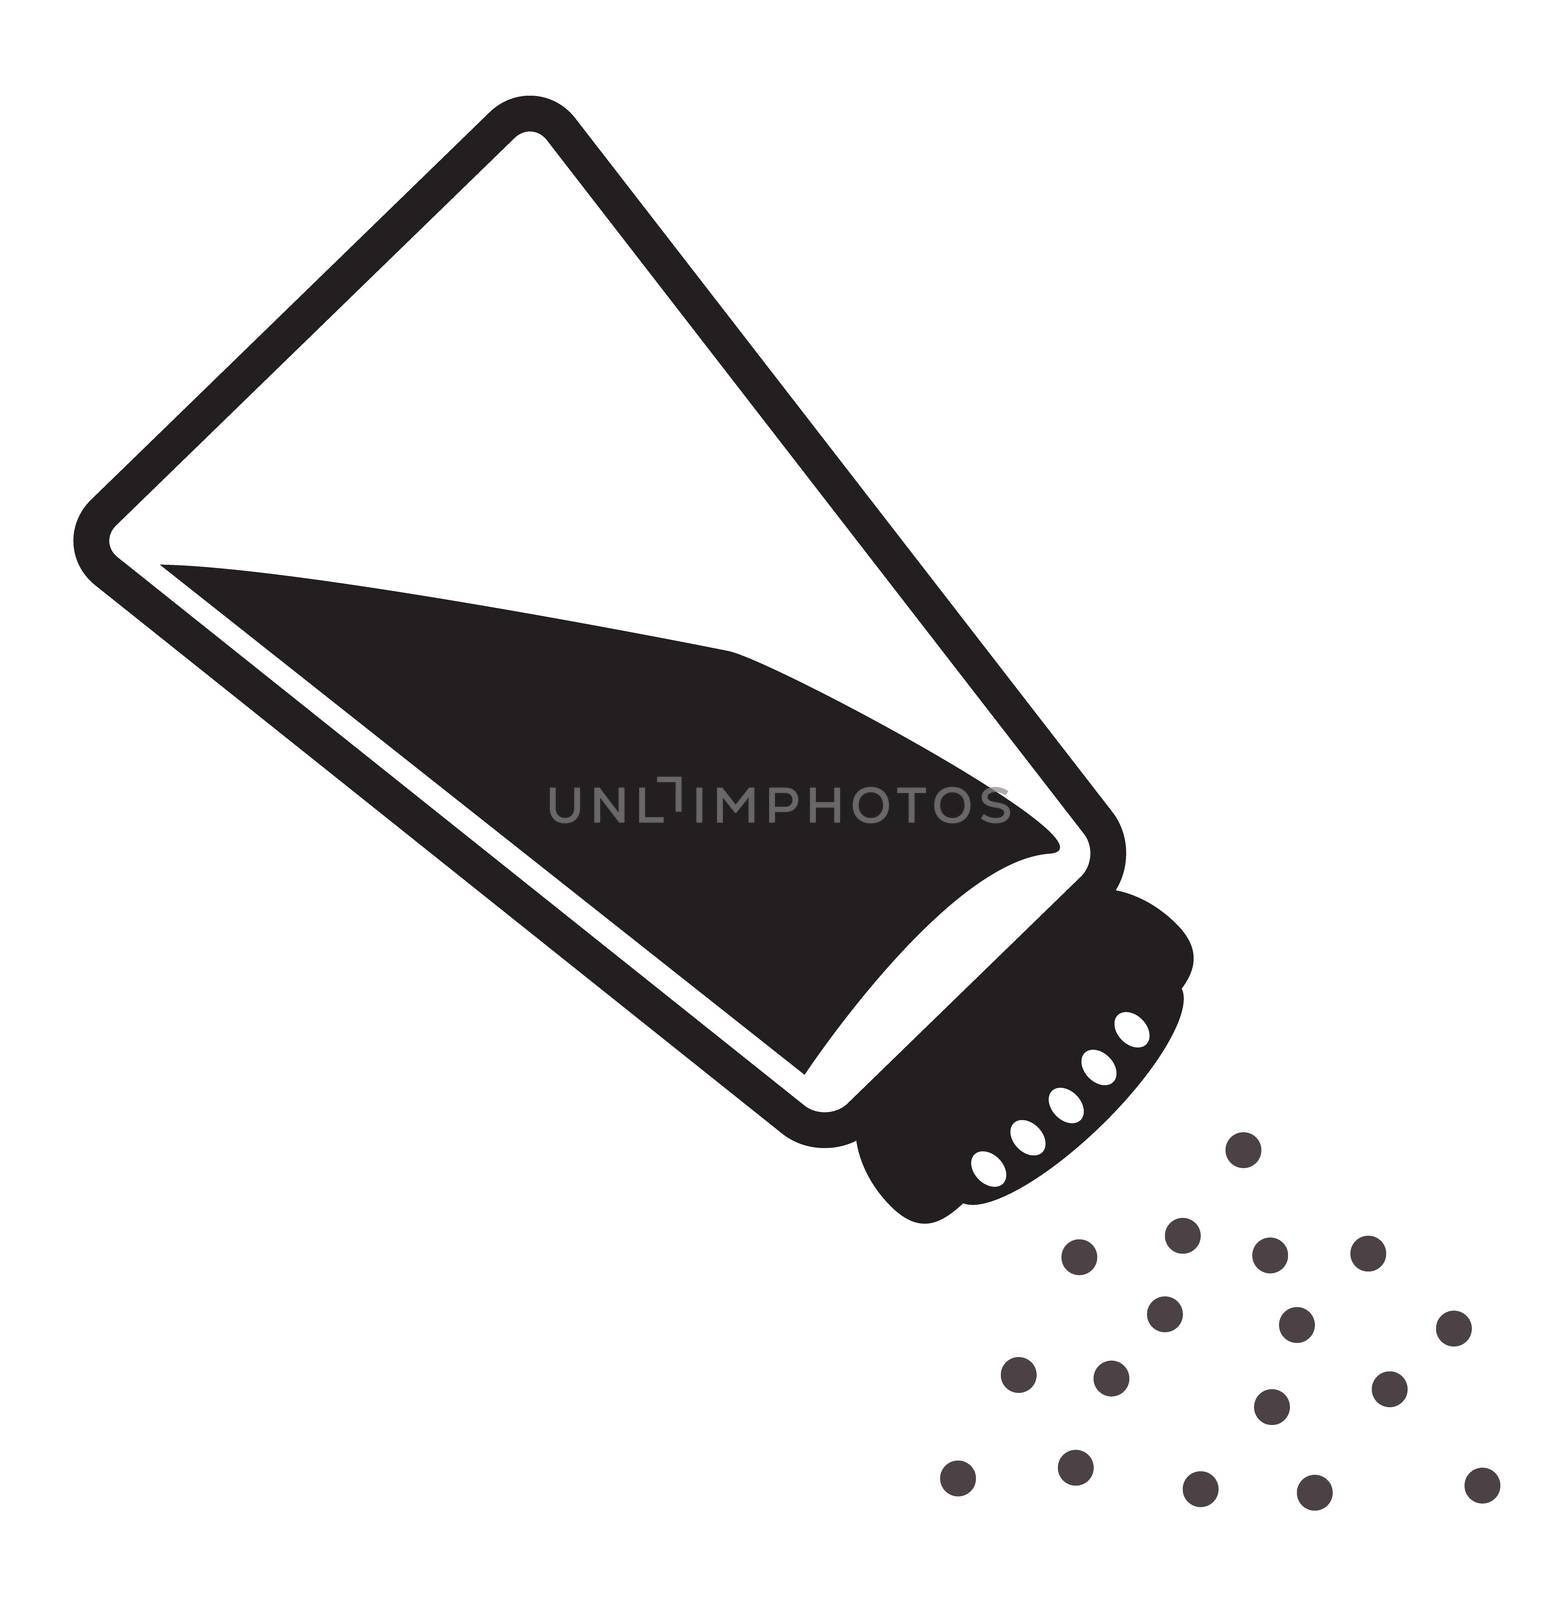 salt icon on white background. salt shaker icon on flat style is by suthee